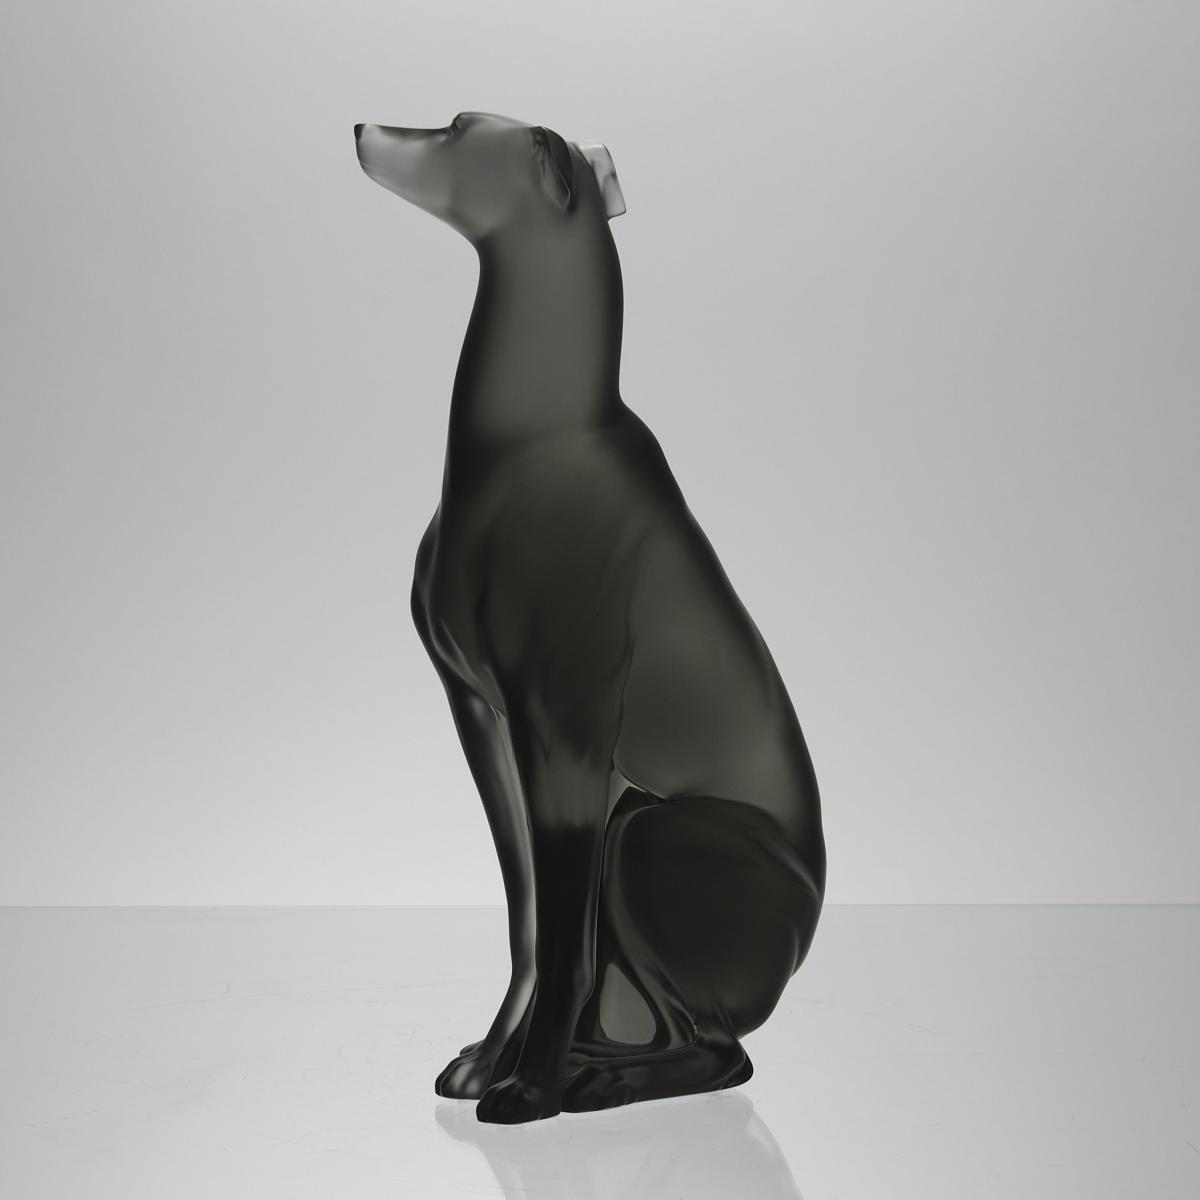 Limited Edition Crystal Glass Sculpture "Greyhound" by Lalique